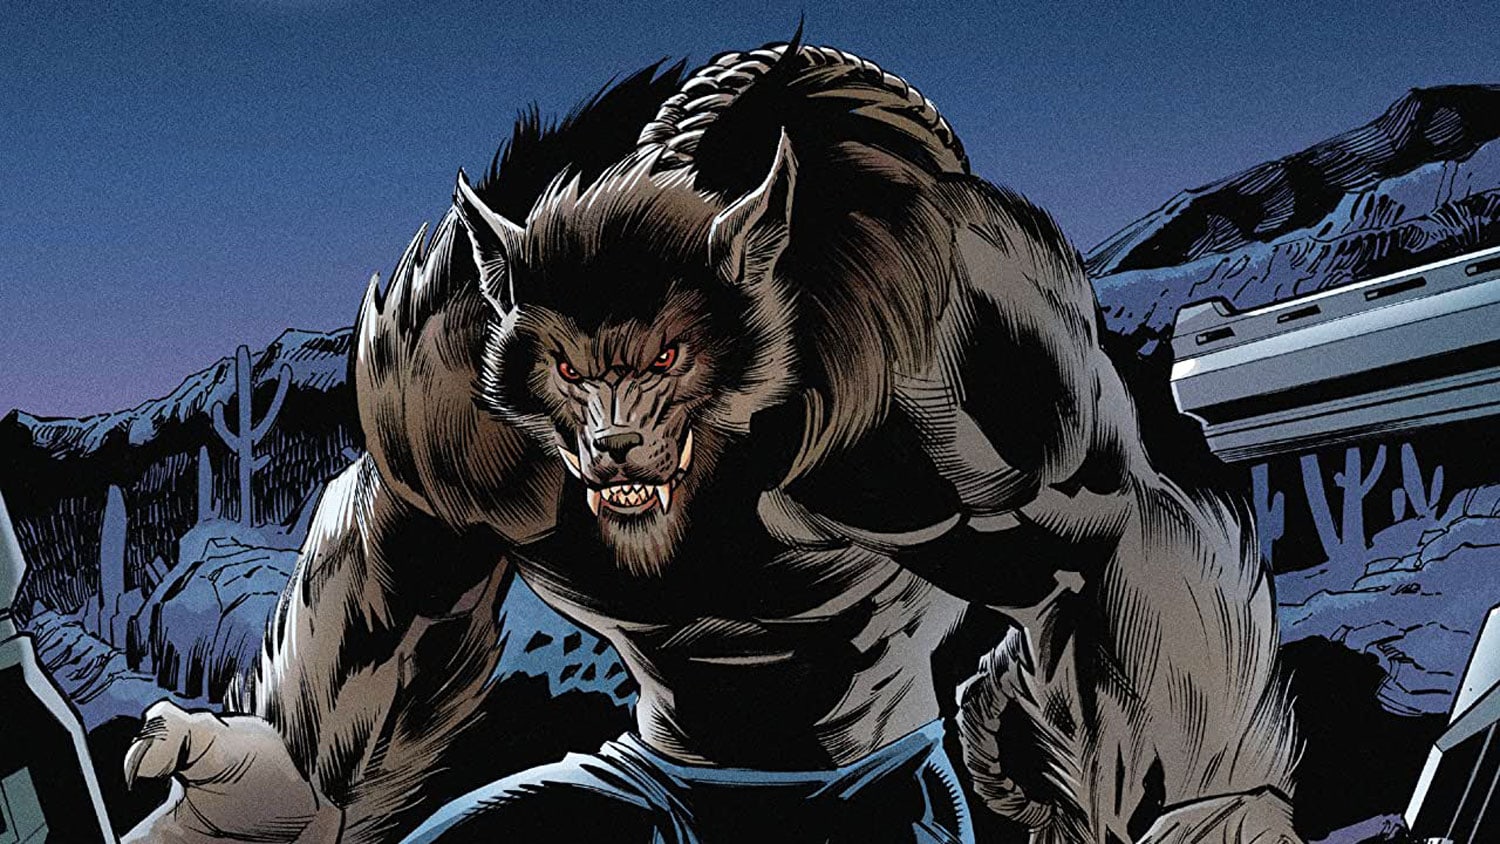 How Does Werewolf By Night Connect to the MCU?